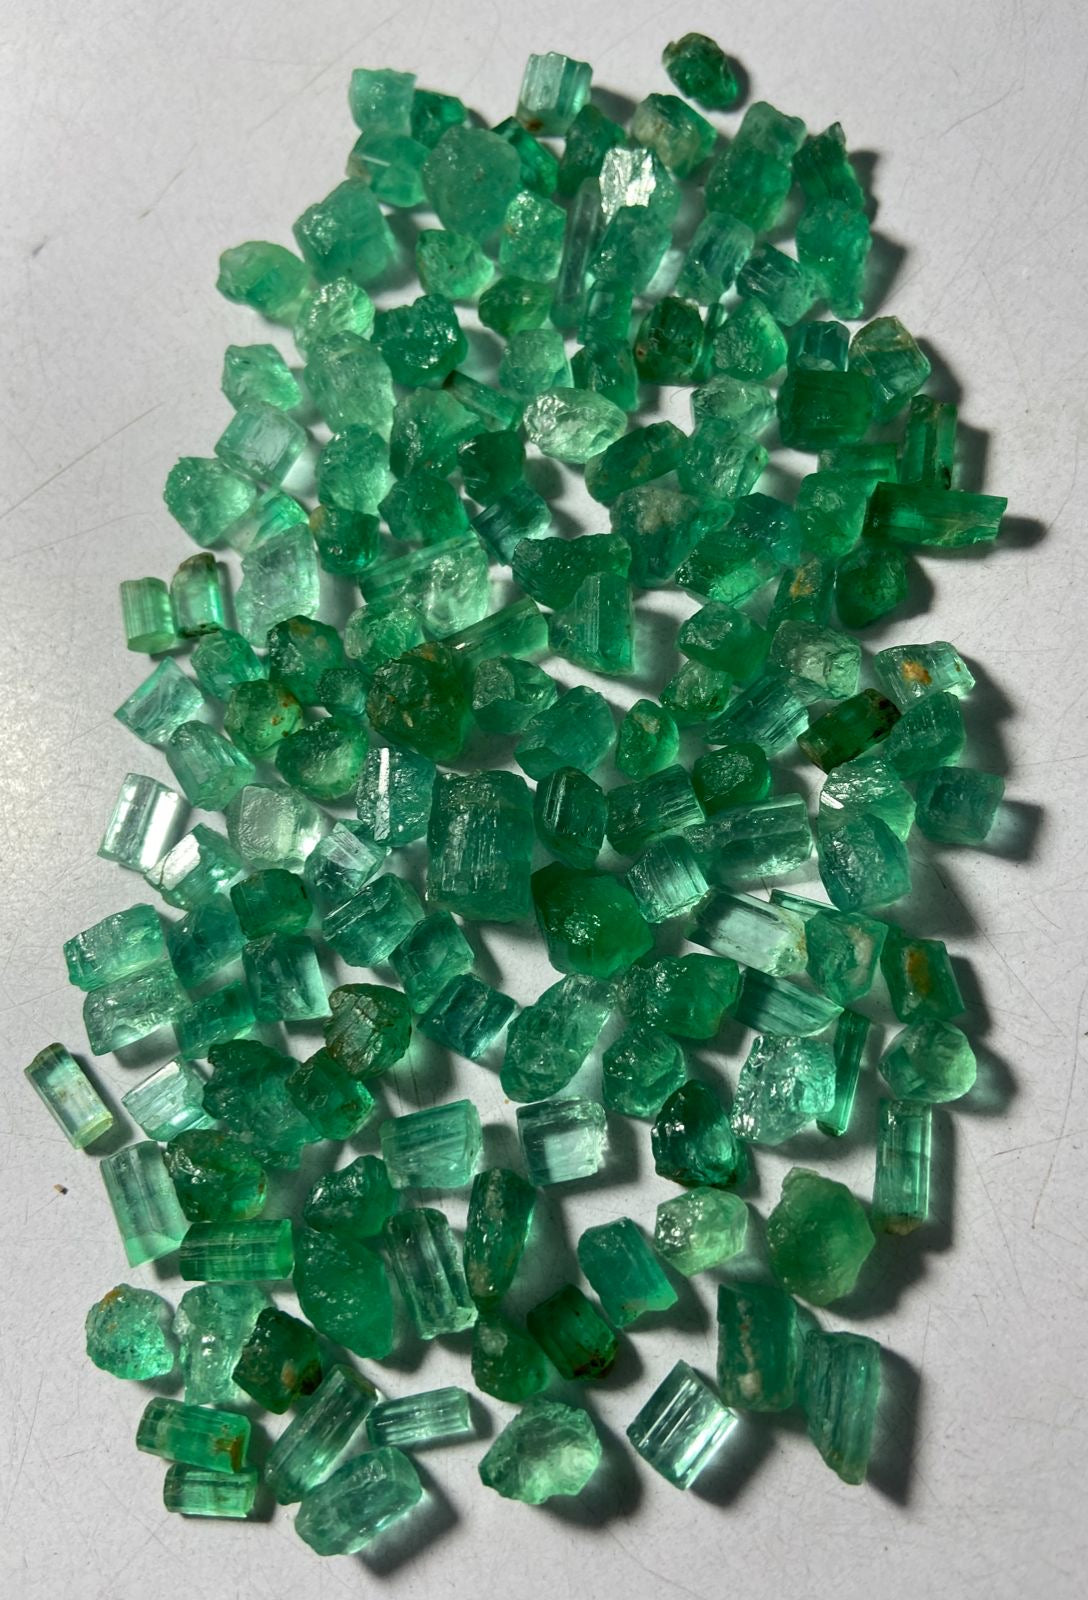 200 carats Natural Raw Emerald Green Stones for faceting